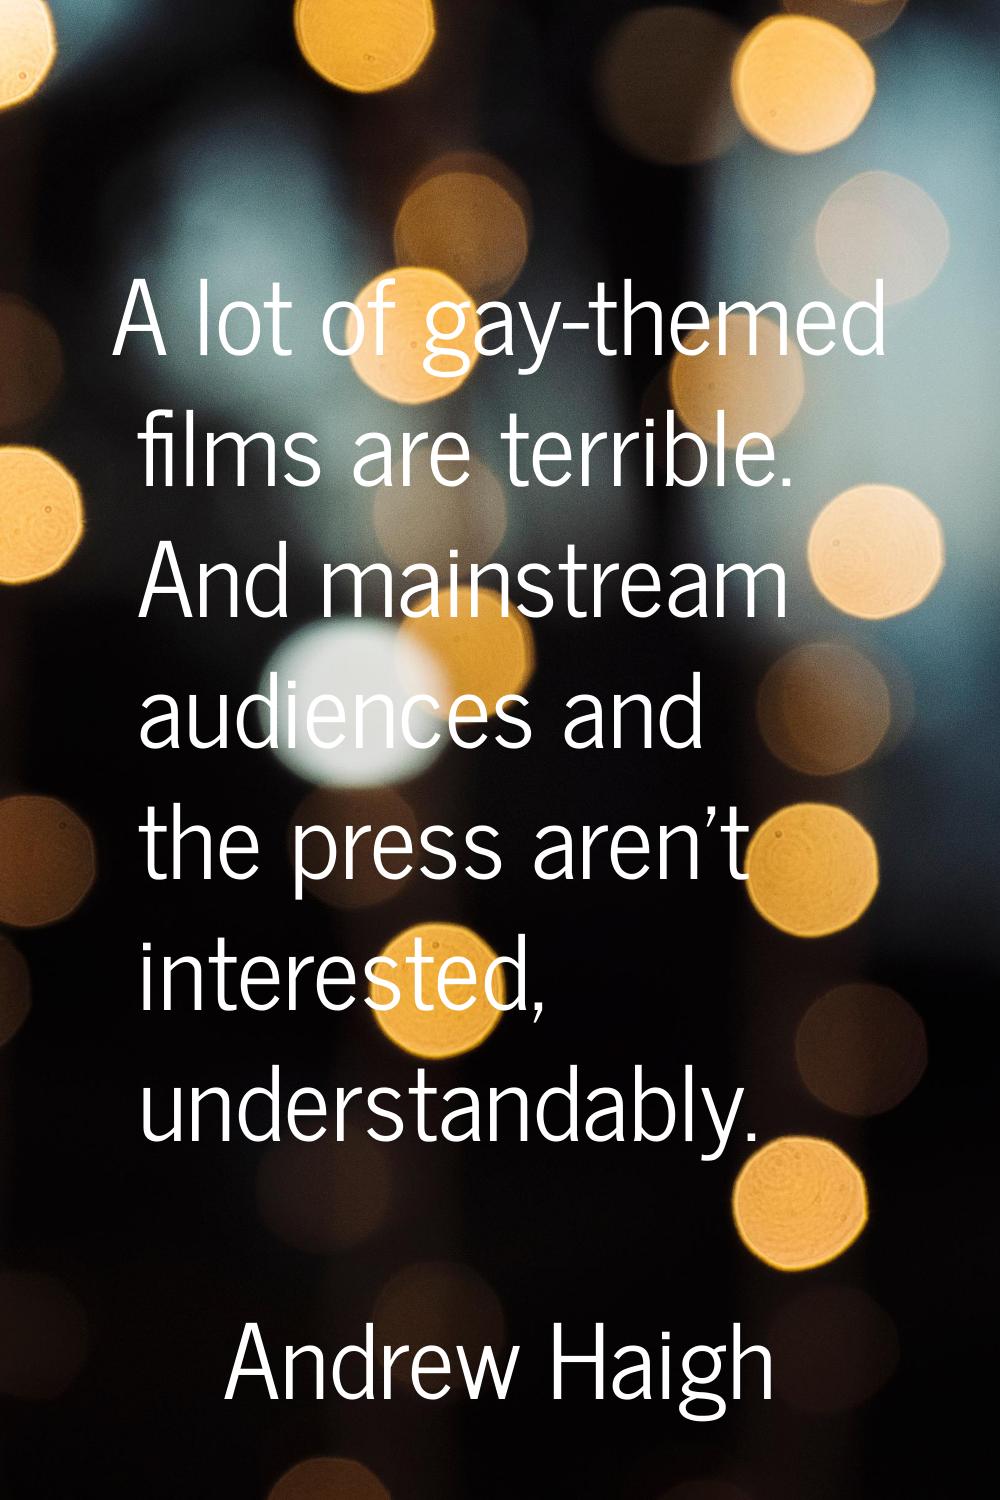 A lot of gay-themed films are terrible. And mainstream audiences and the press aren't interested, u